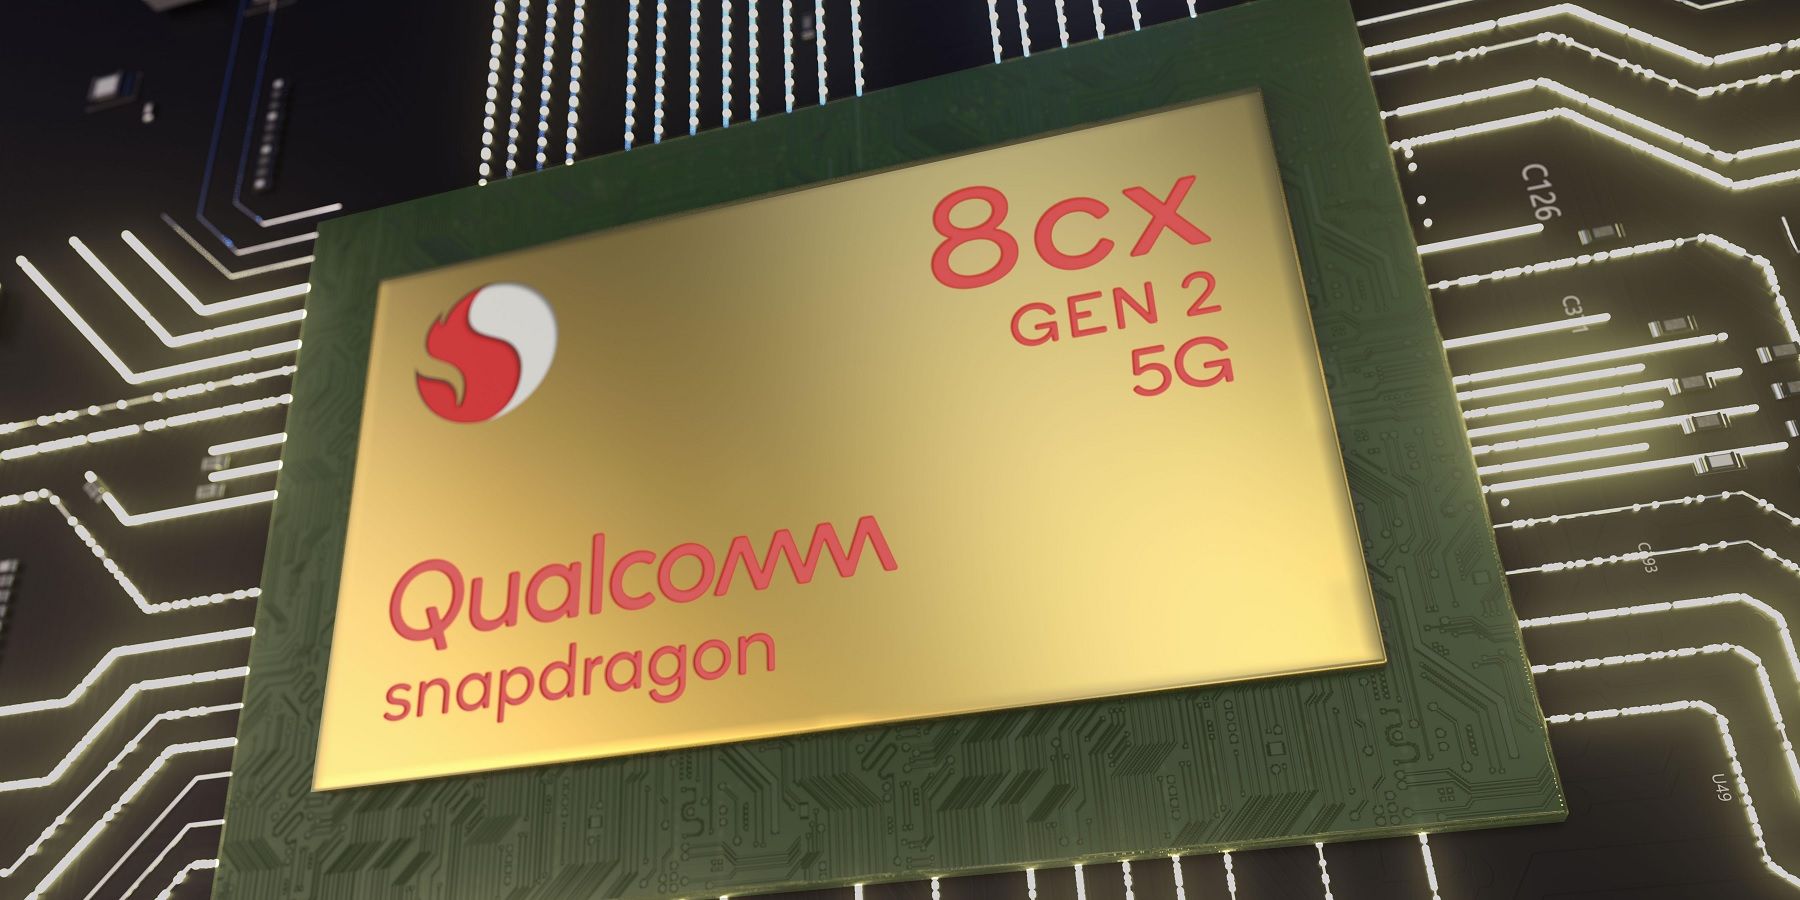 2In1 Laptops To Get 5G & WiFi Upgrades With Qualcomms Snapdragon 8cx Gen 2